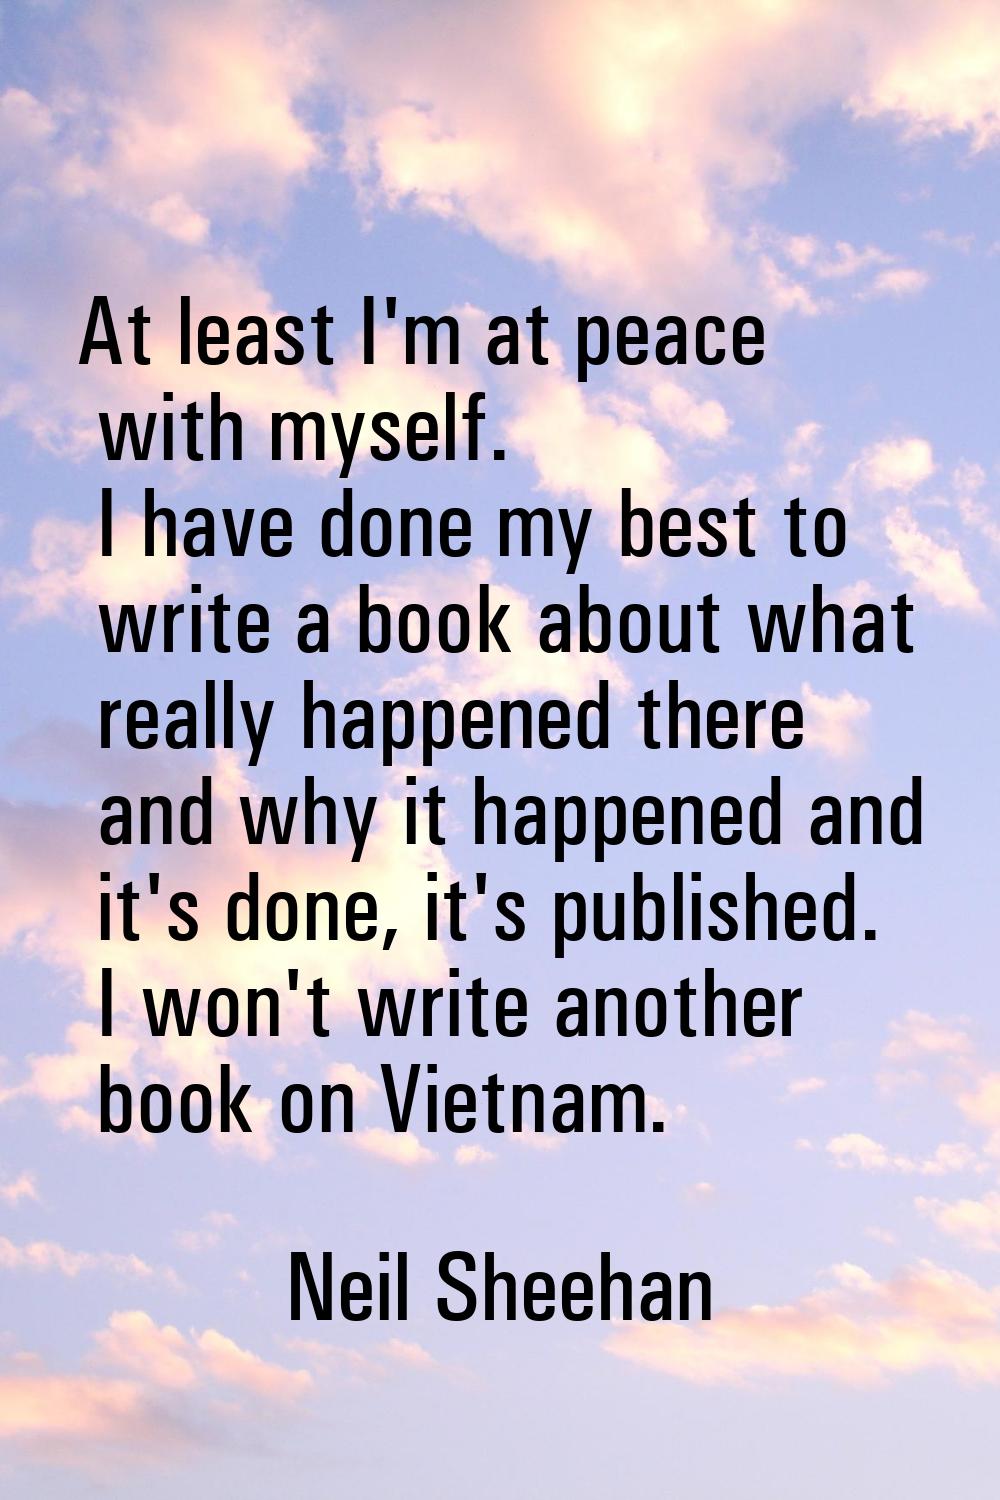 At least I'm at peace with myself. I have done my best to write a book about what really happened t